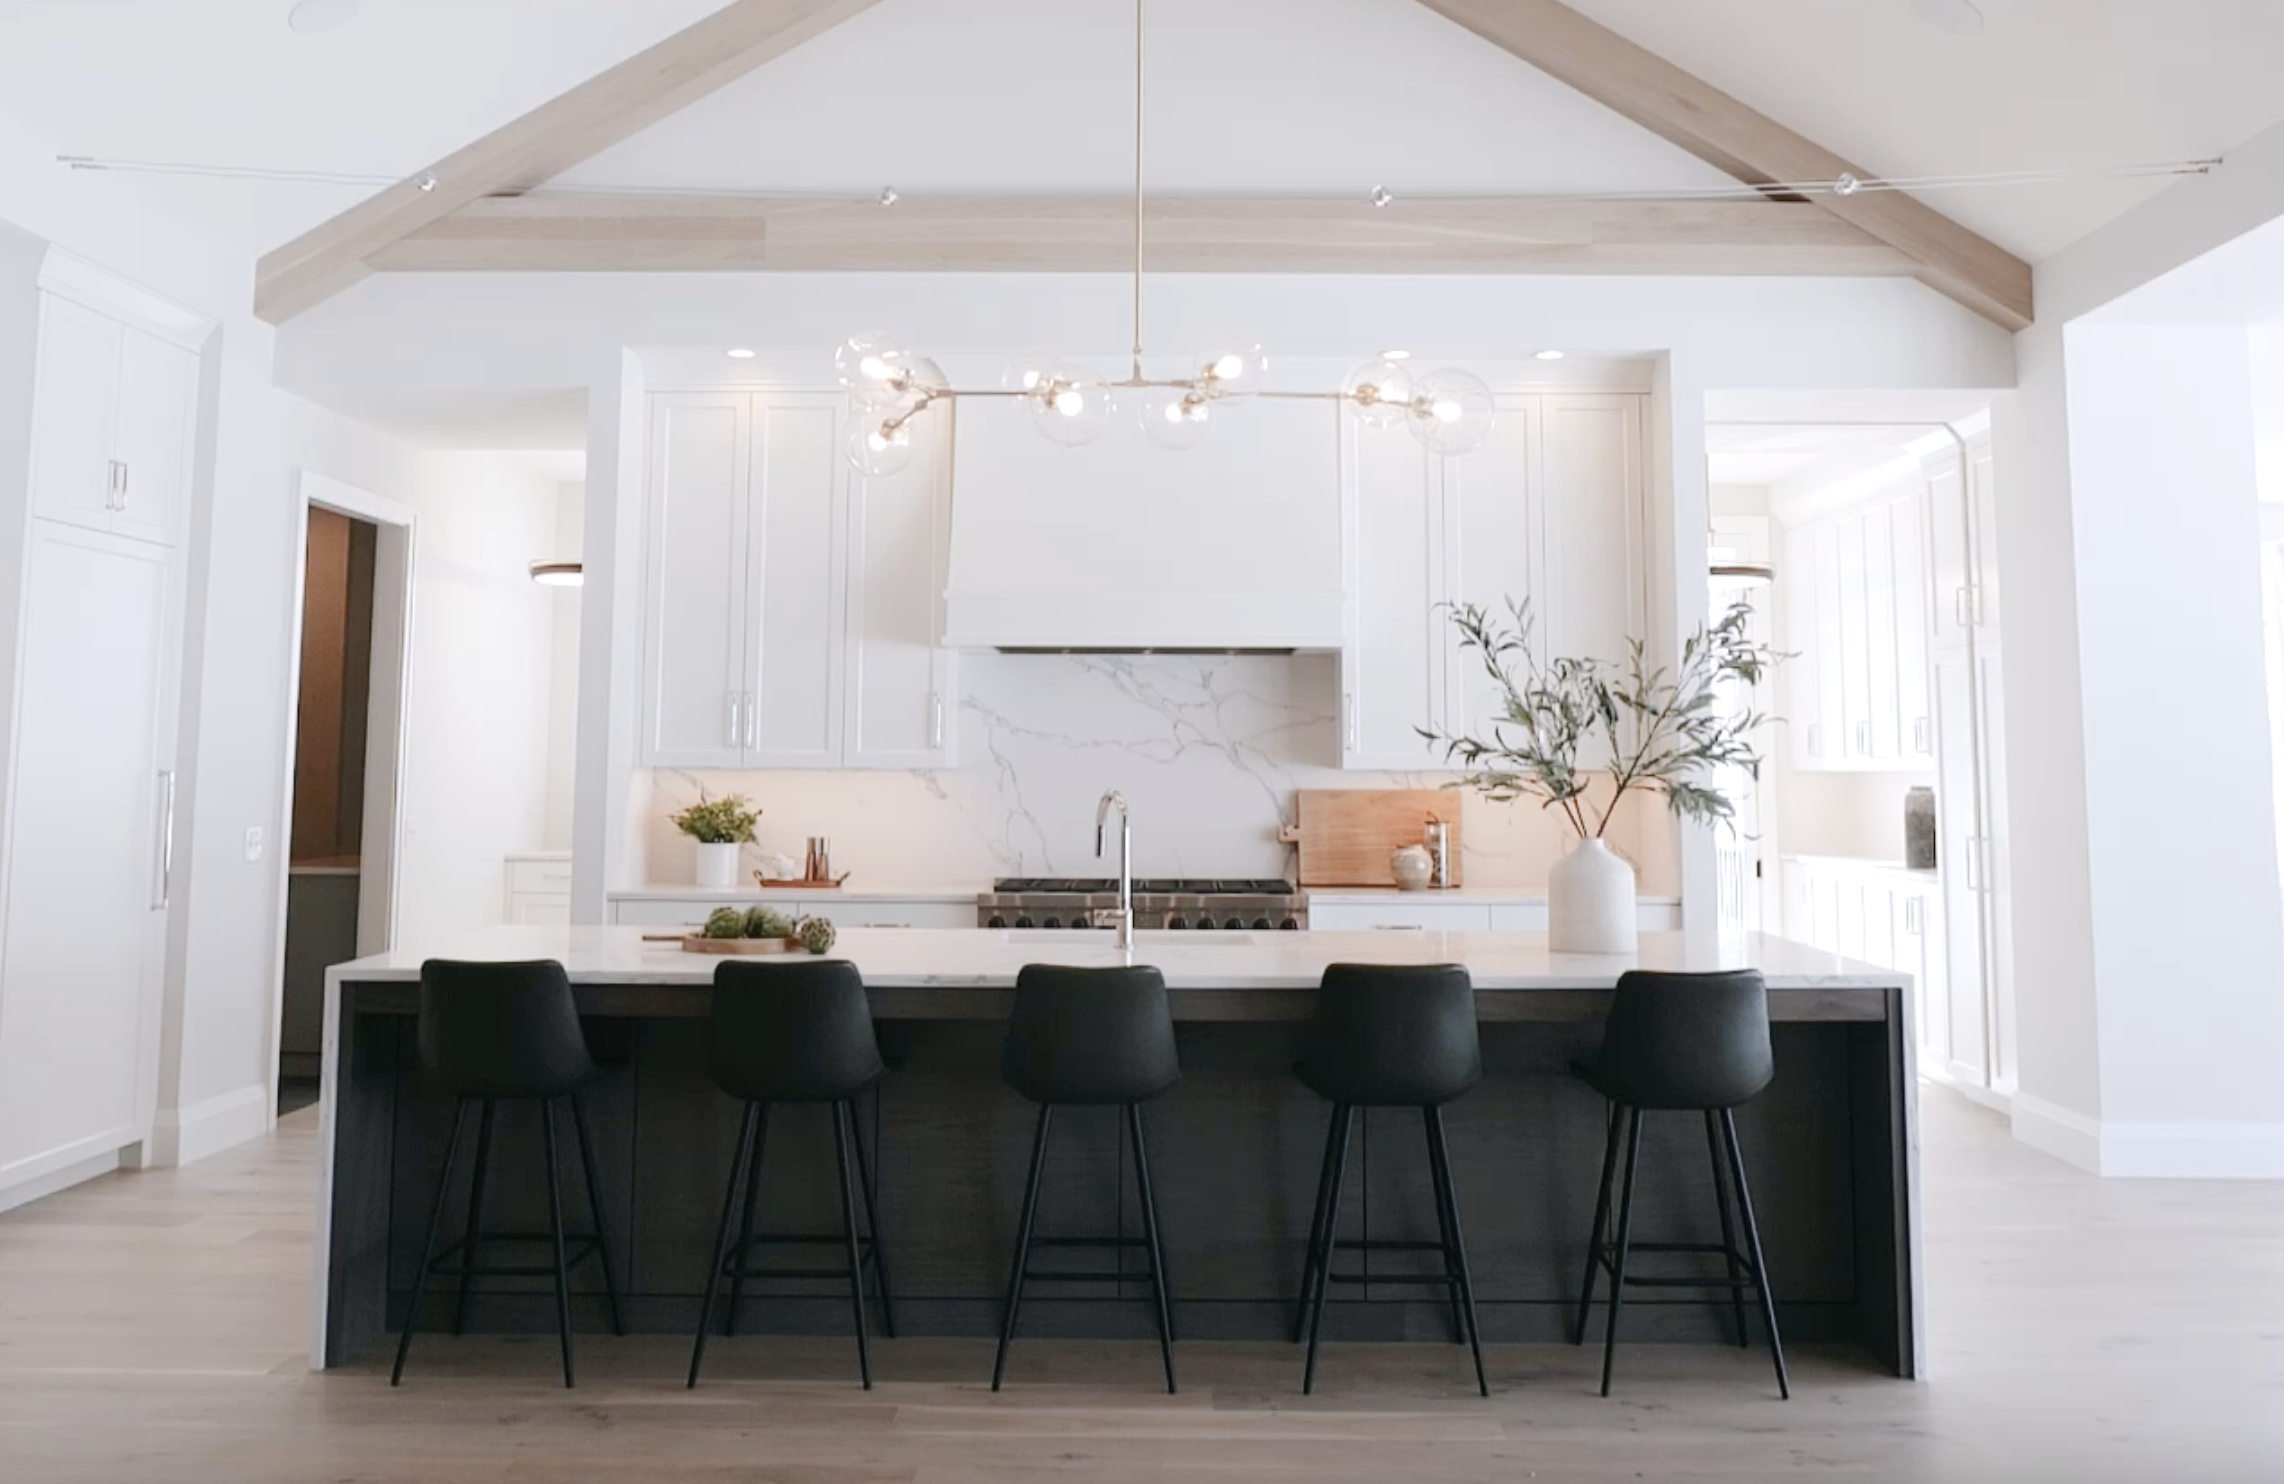 A white kitchen with black stools and a wooden ceiling, perfect for a Woodside remodel.